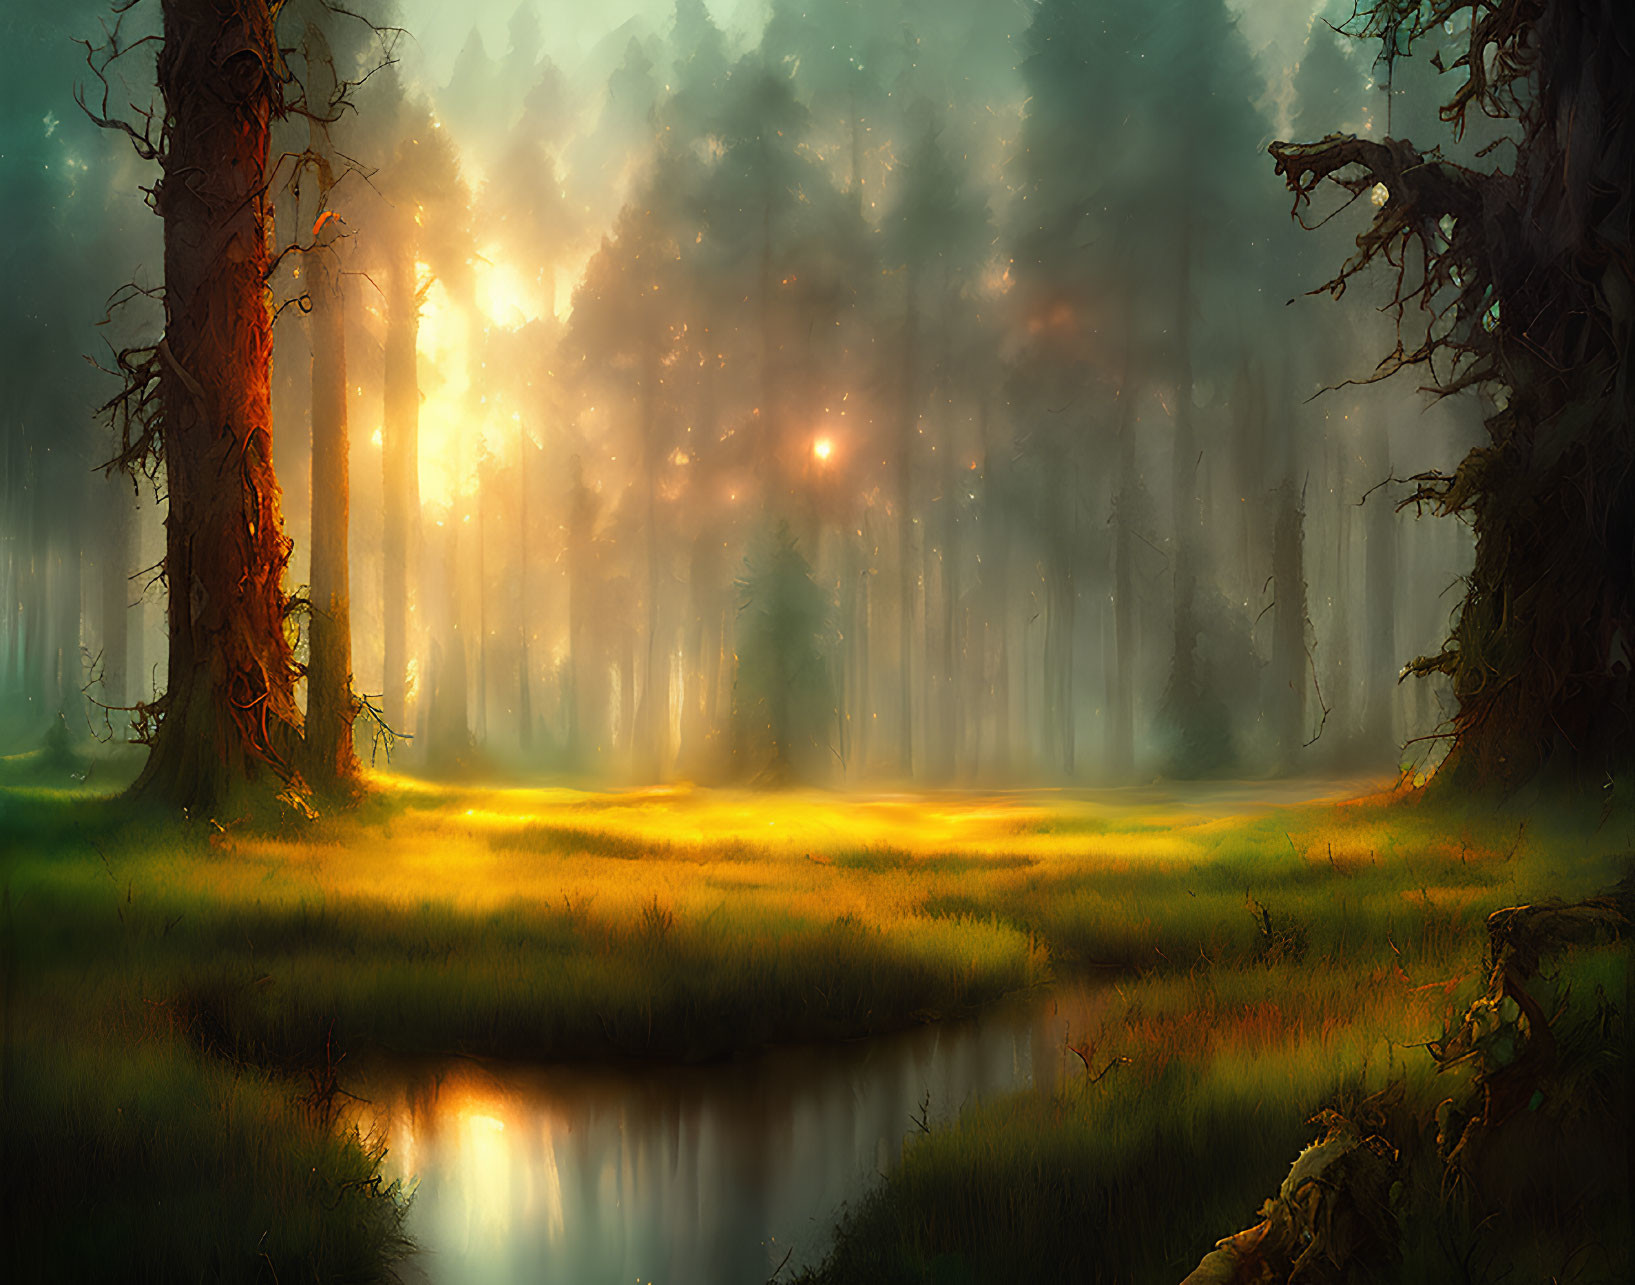 Misty enchanted forest with sunbeams, meadow, and serene stream